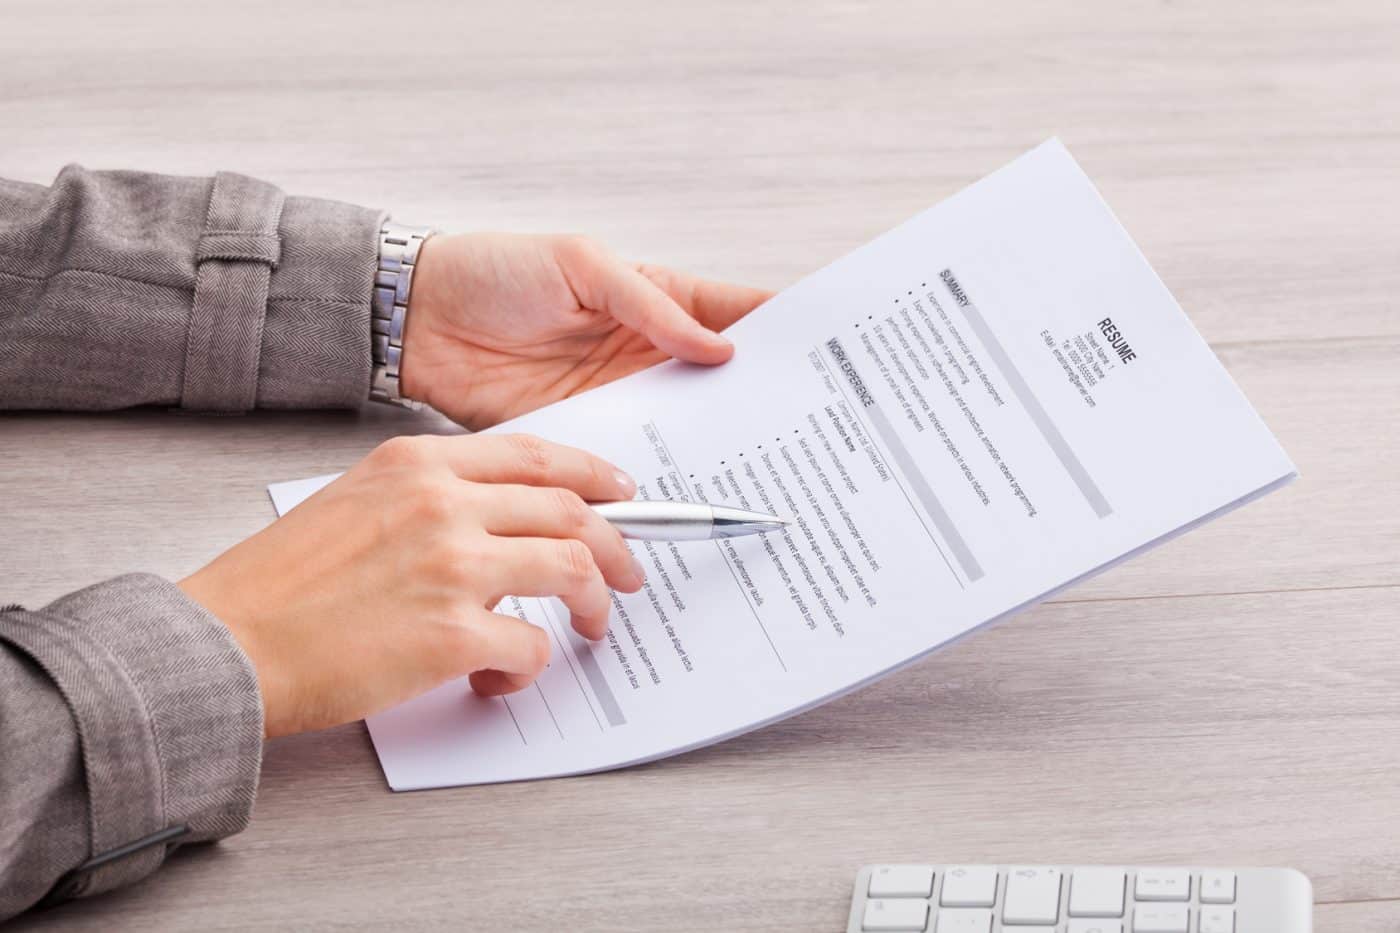 This blog perfectly describes how to write a brilliant CV